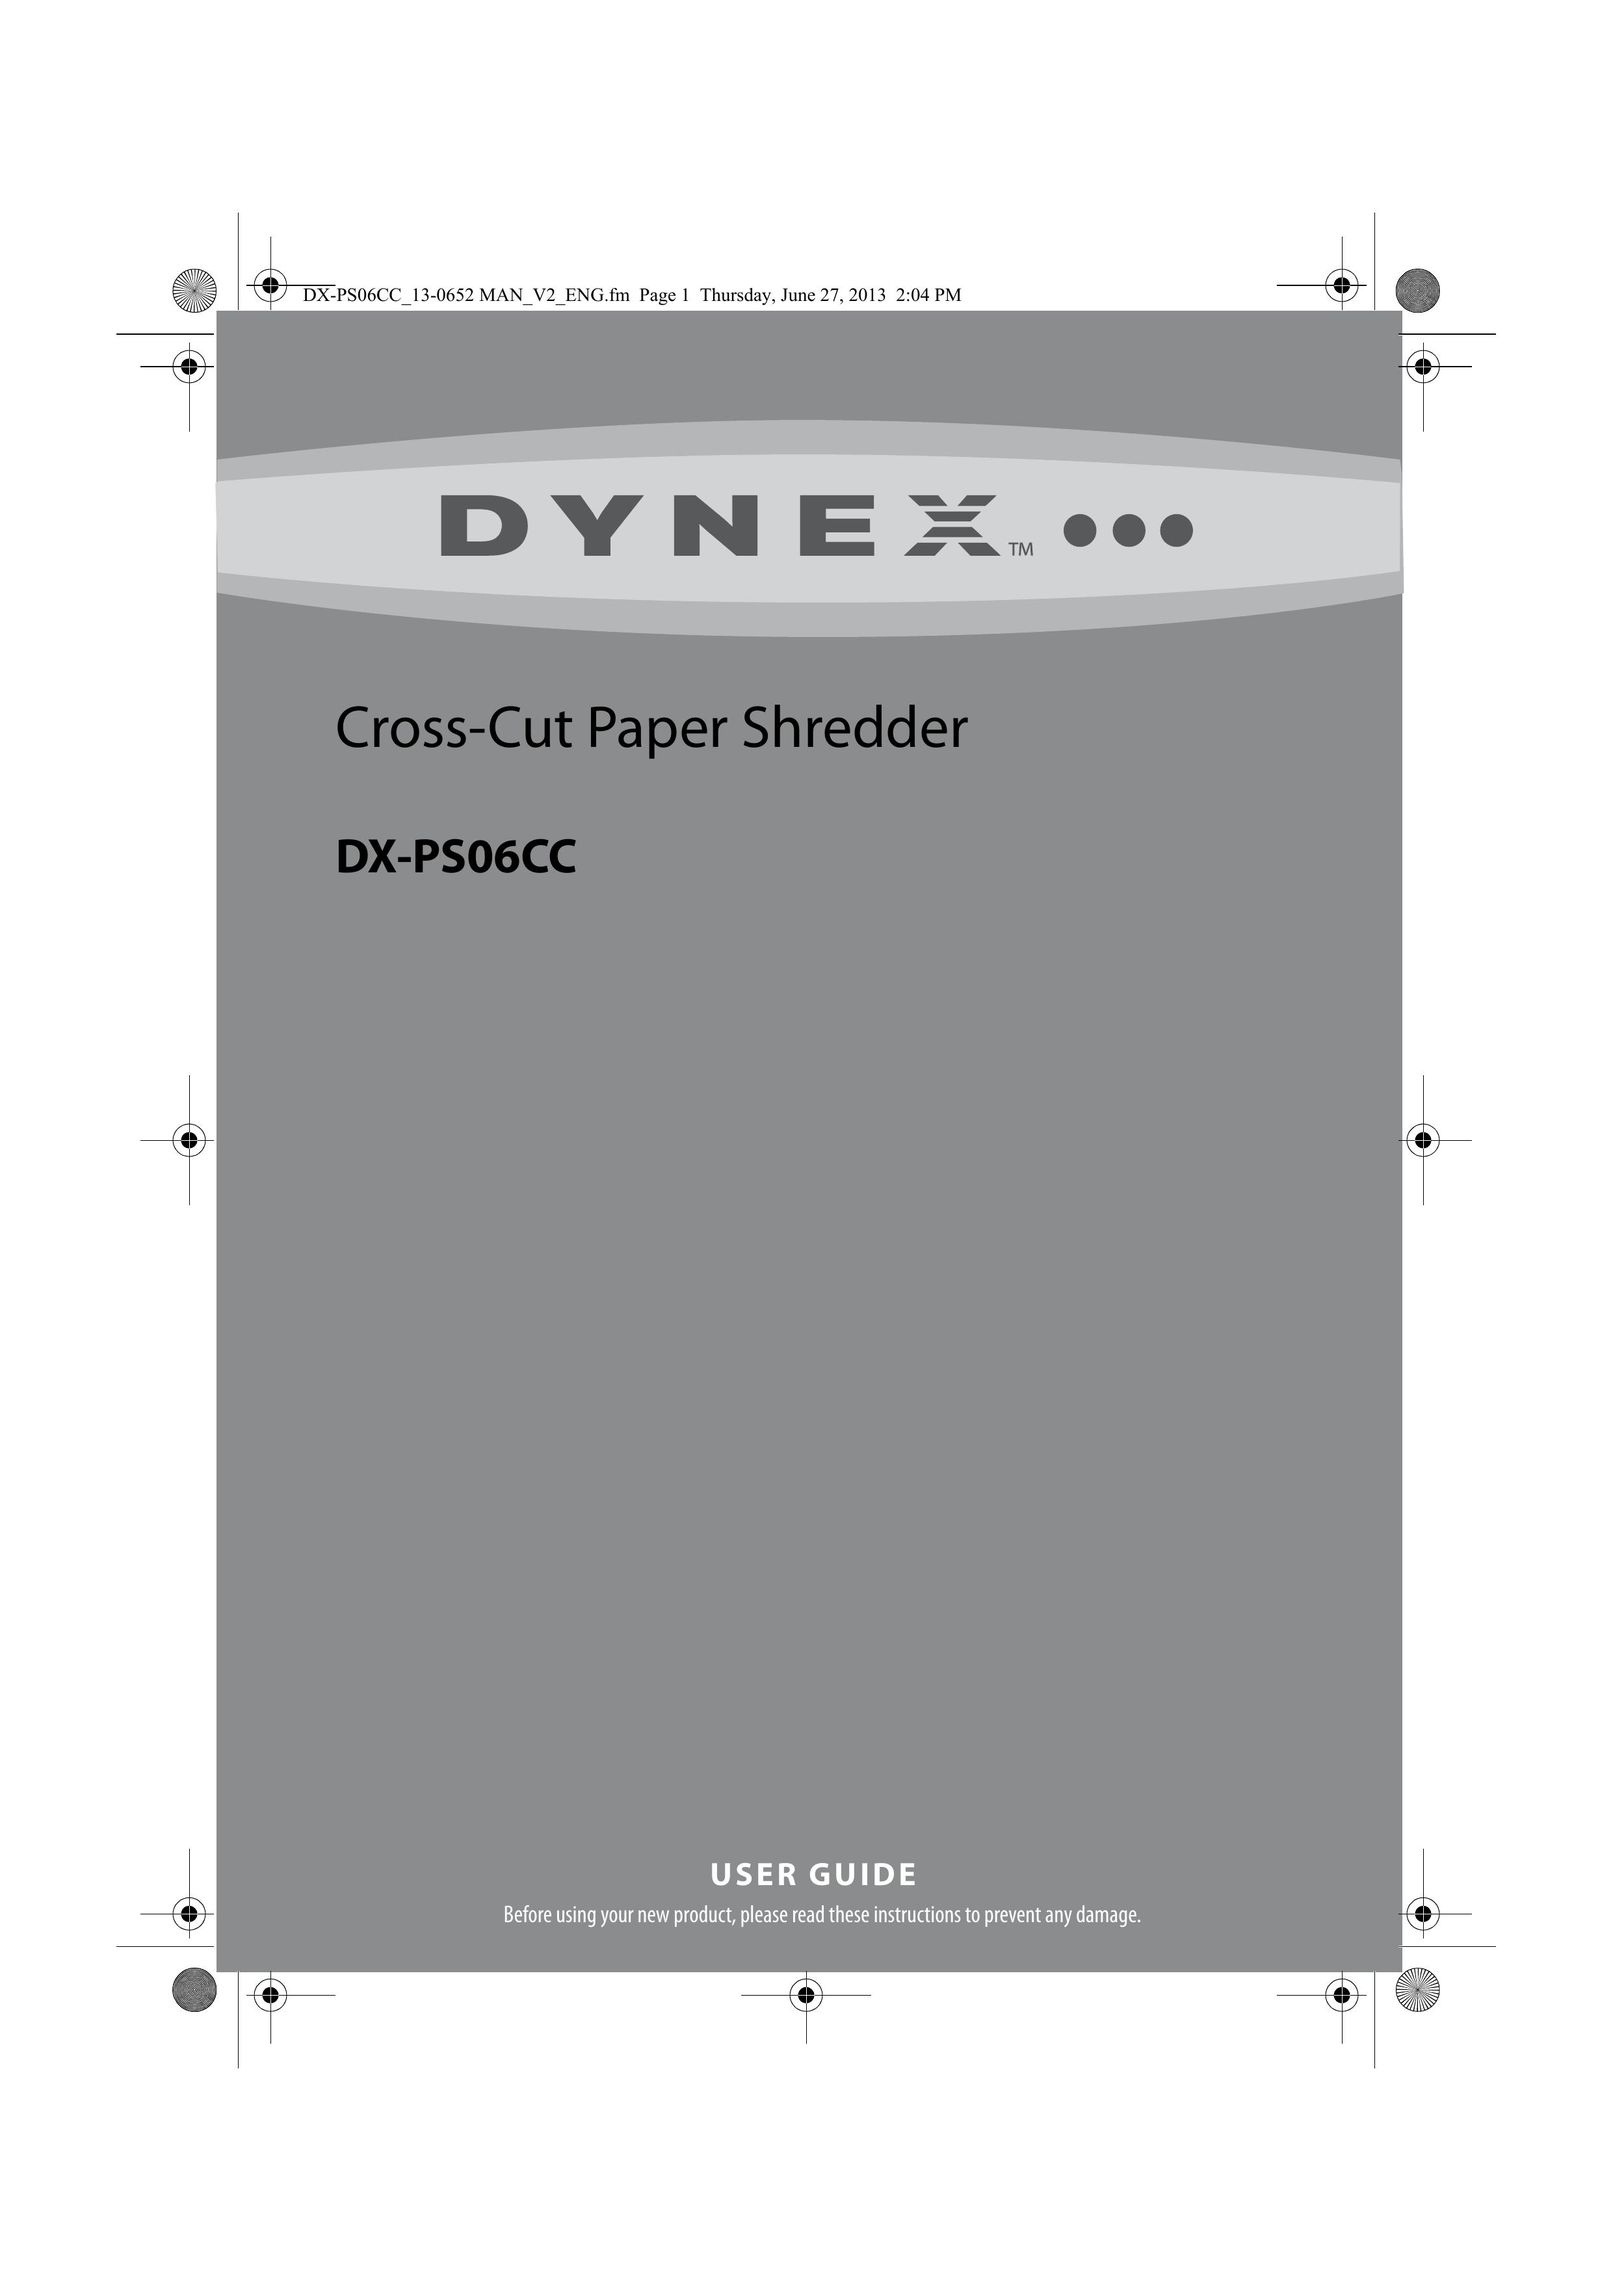 Dynex DX-PS06CC Paper Shredder User Manual (Page 1)